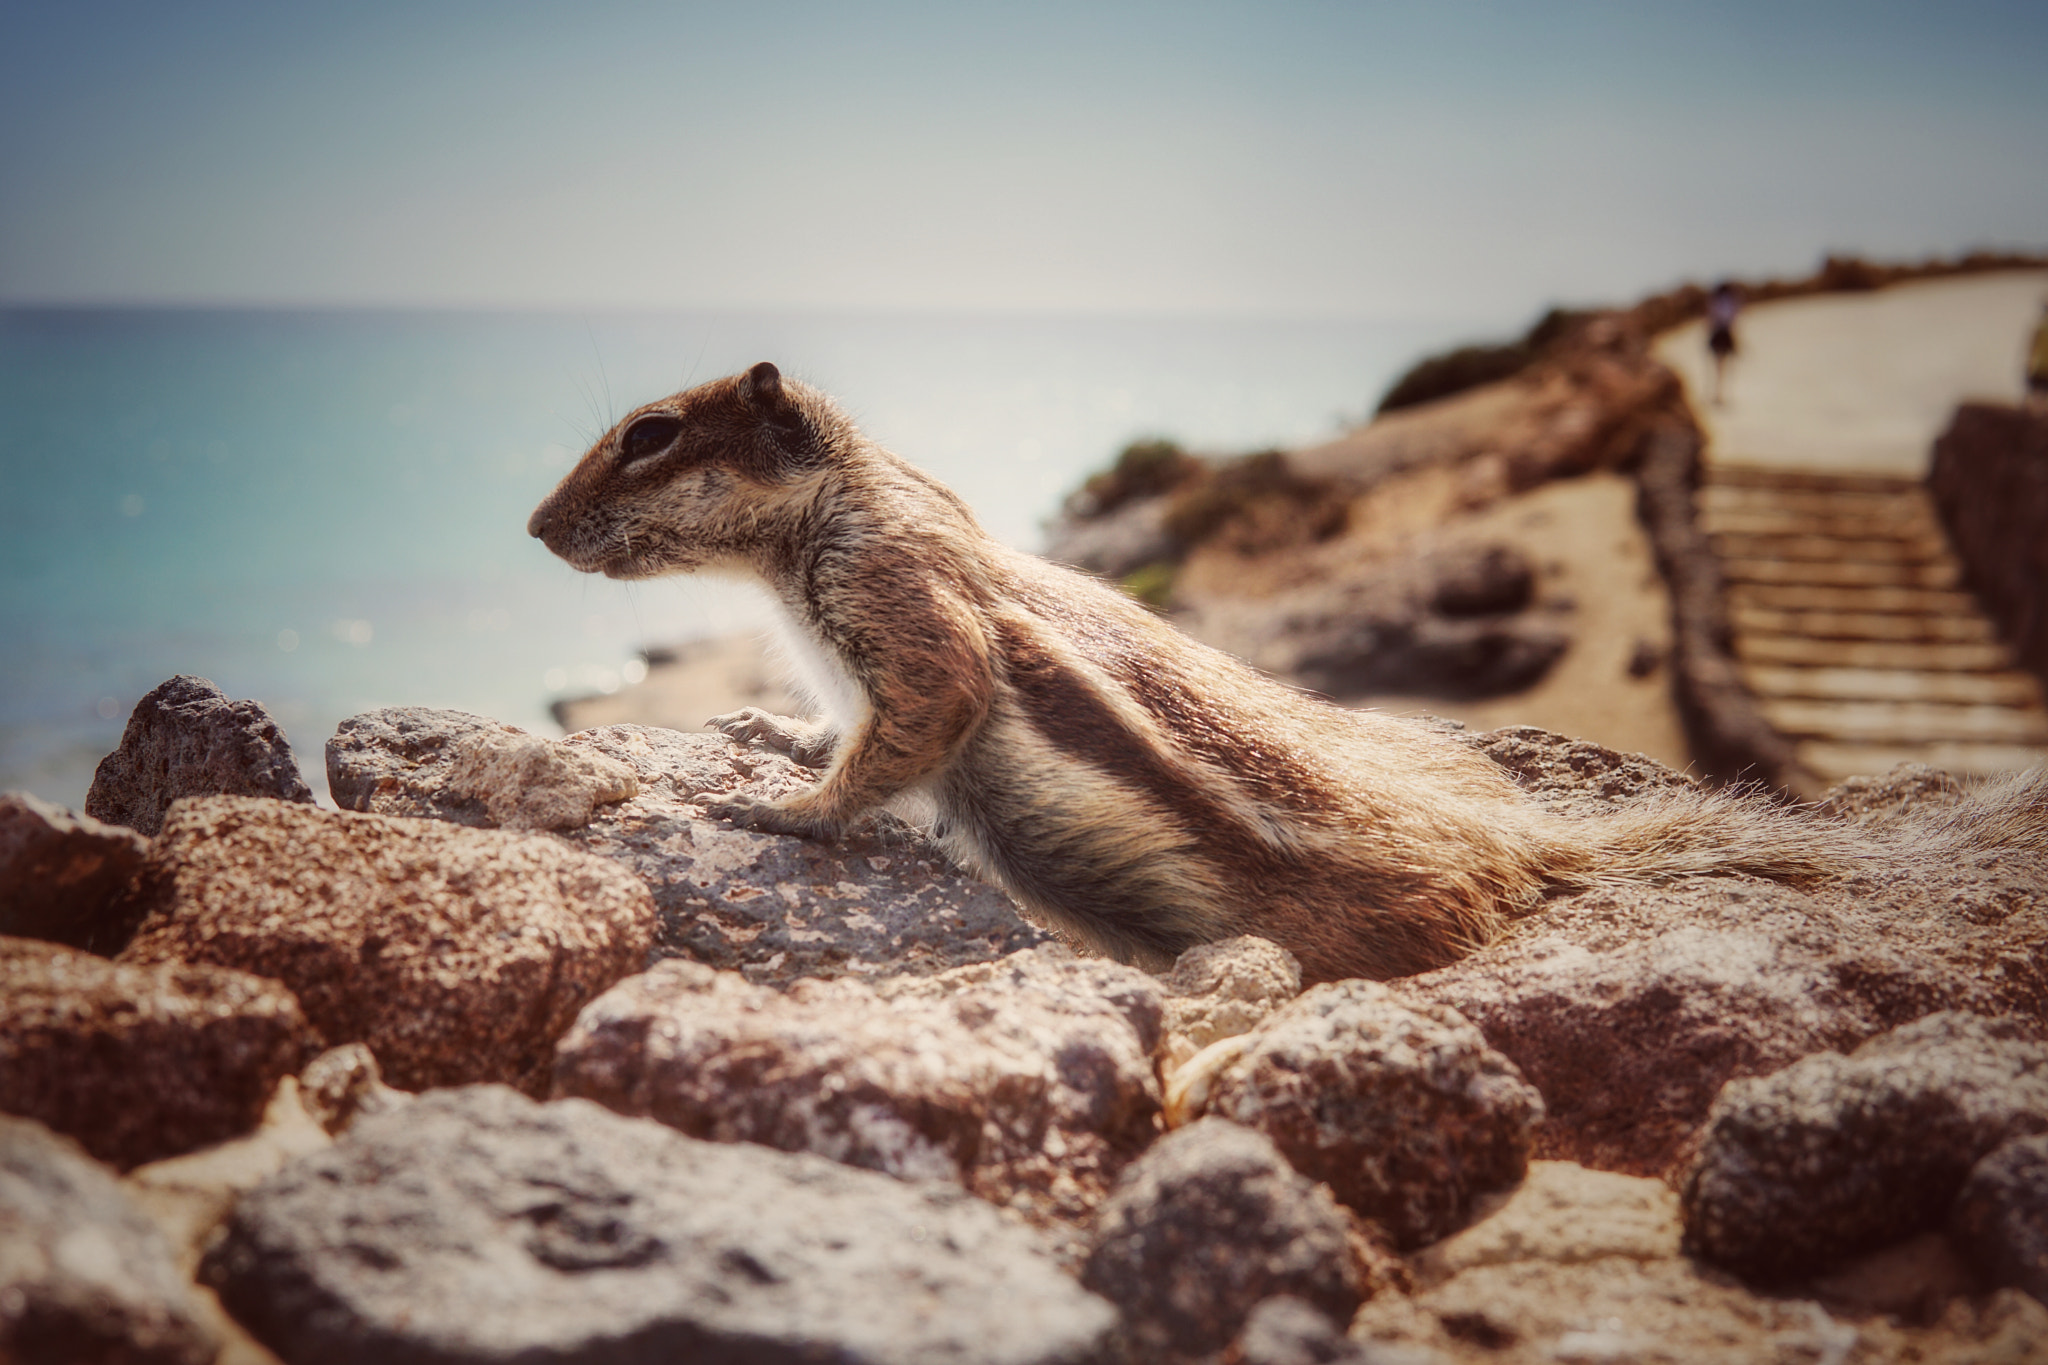 Sony a6300 + Sigma 30mm F1.4 DC DN | C sample photo. Greg the ground squirrel photography